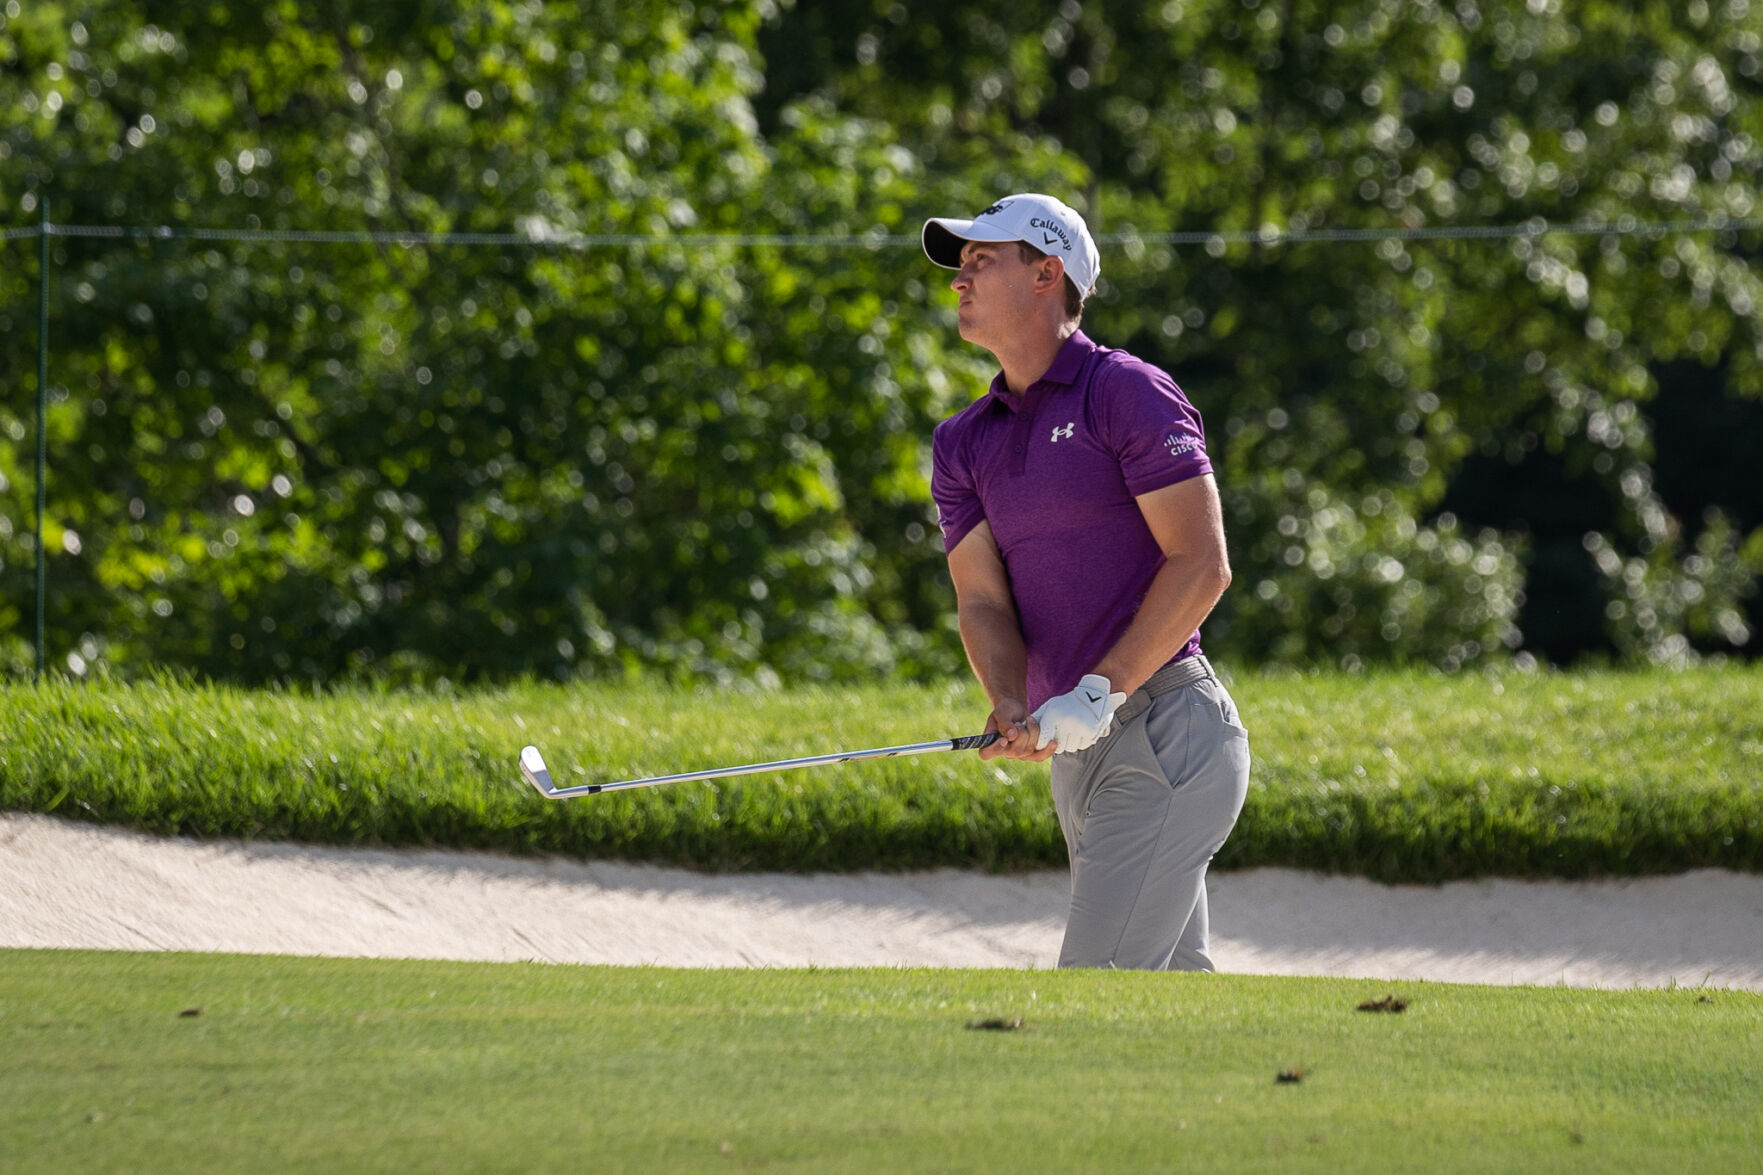 JDC McNealy, Grillo and McCarthy, Taylor team up to go low in Round 2